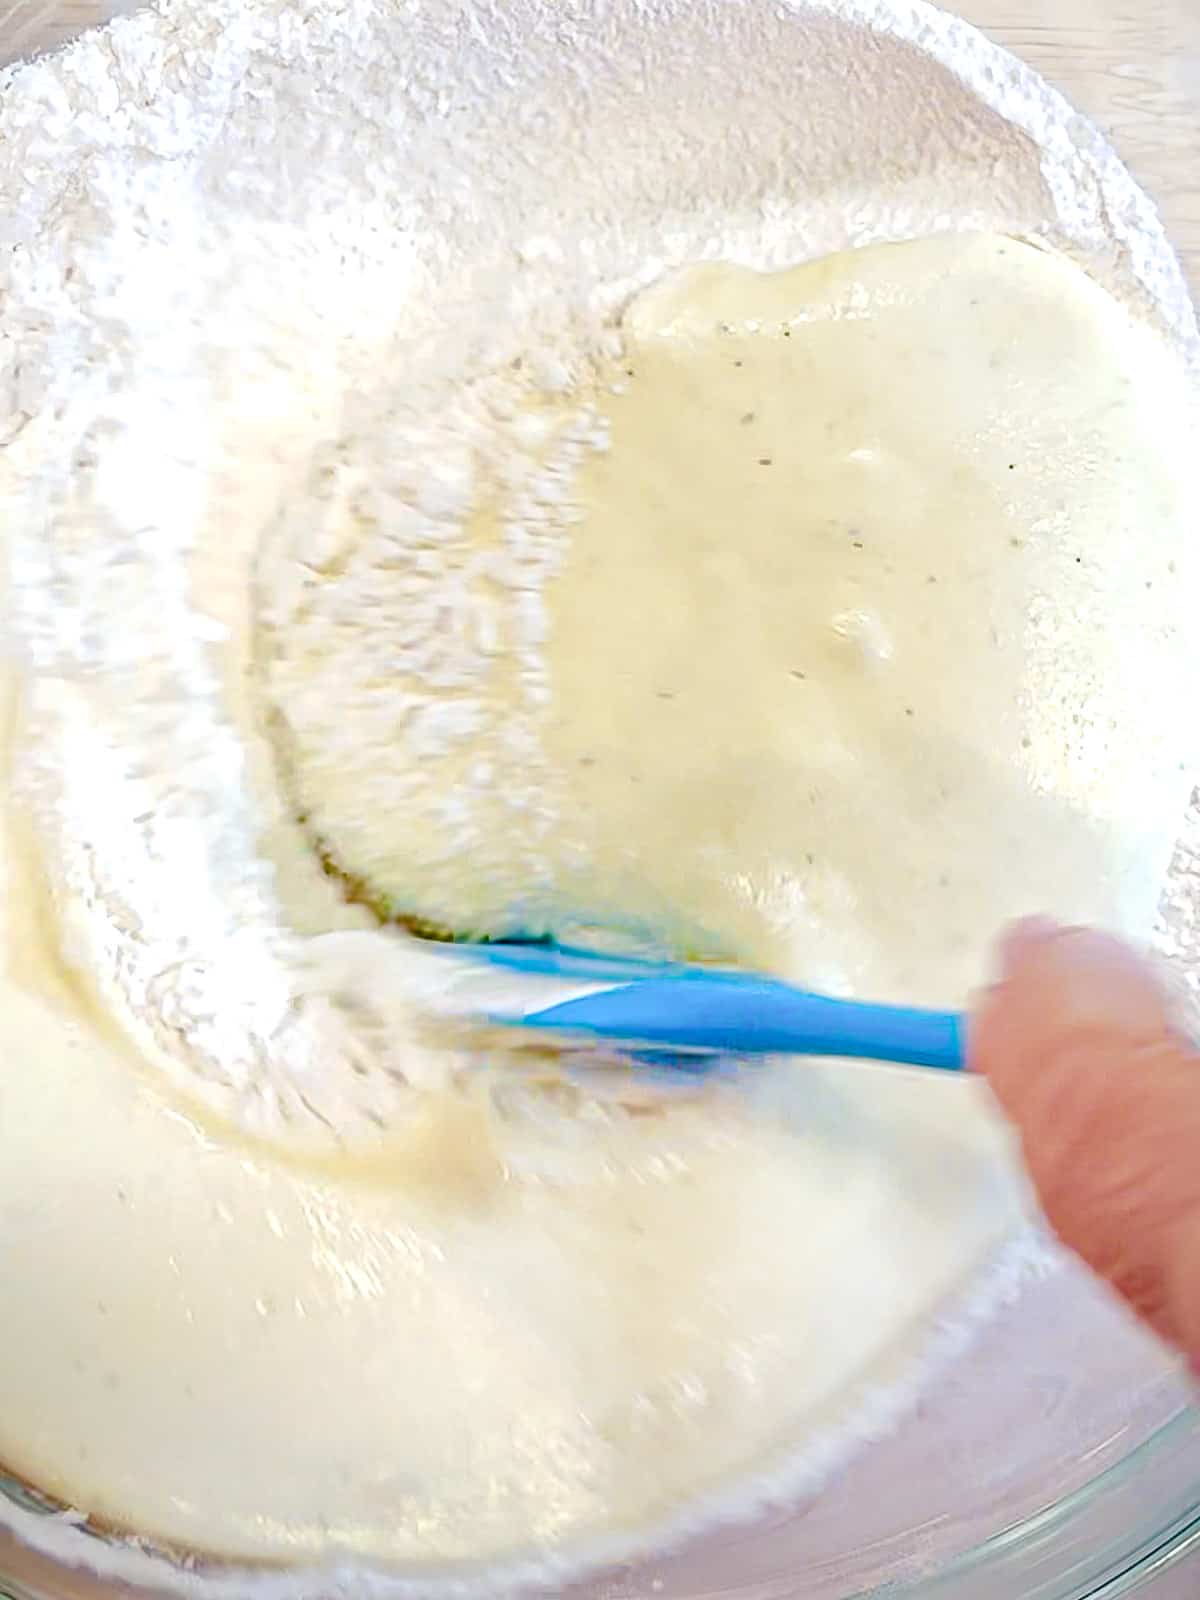 Mixing together wet ingredients with try ingredients to make vanilla donuts.